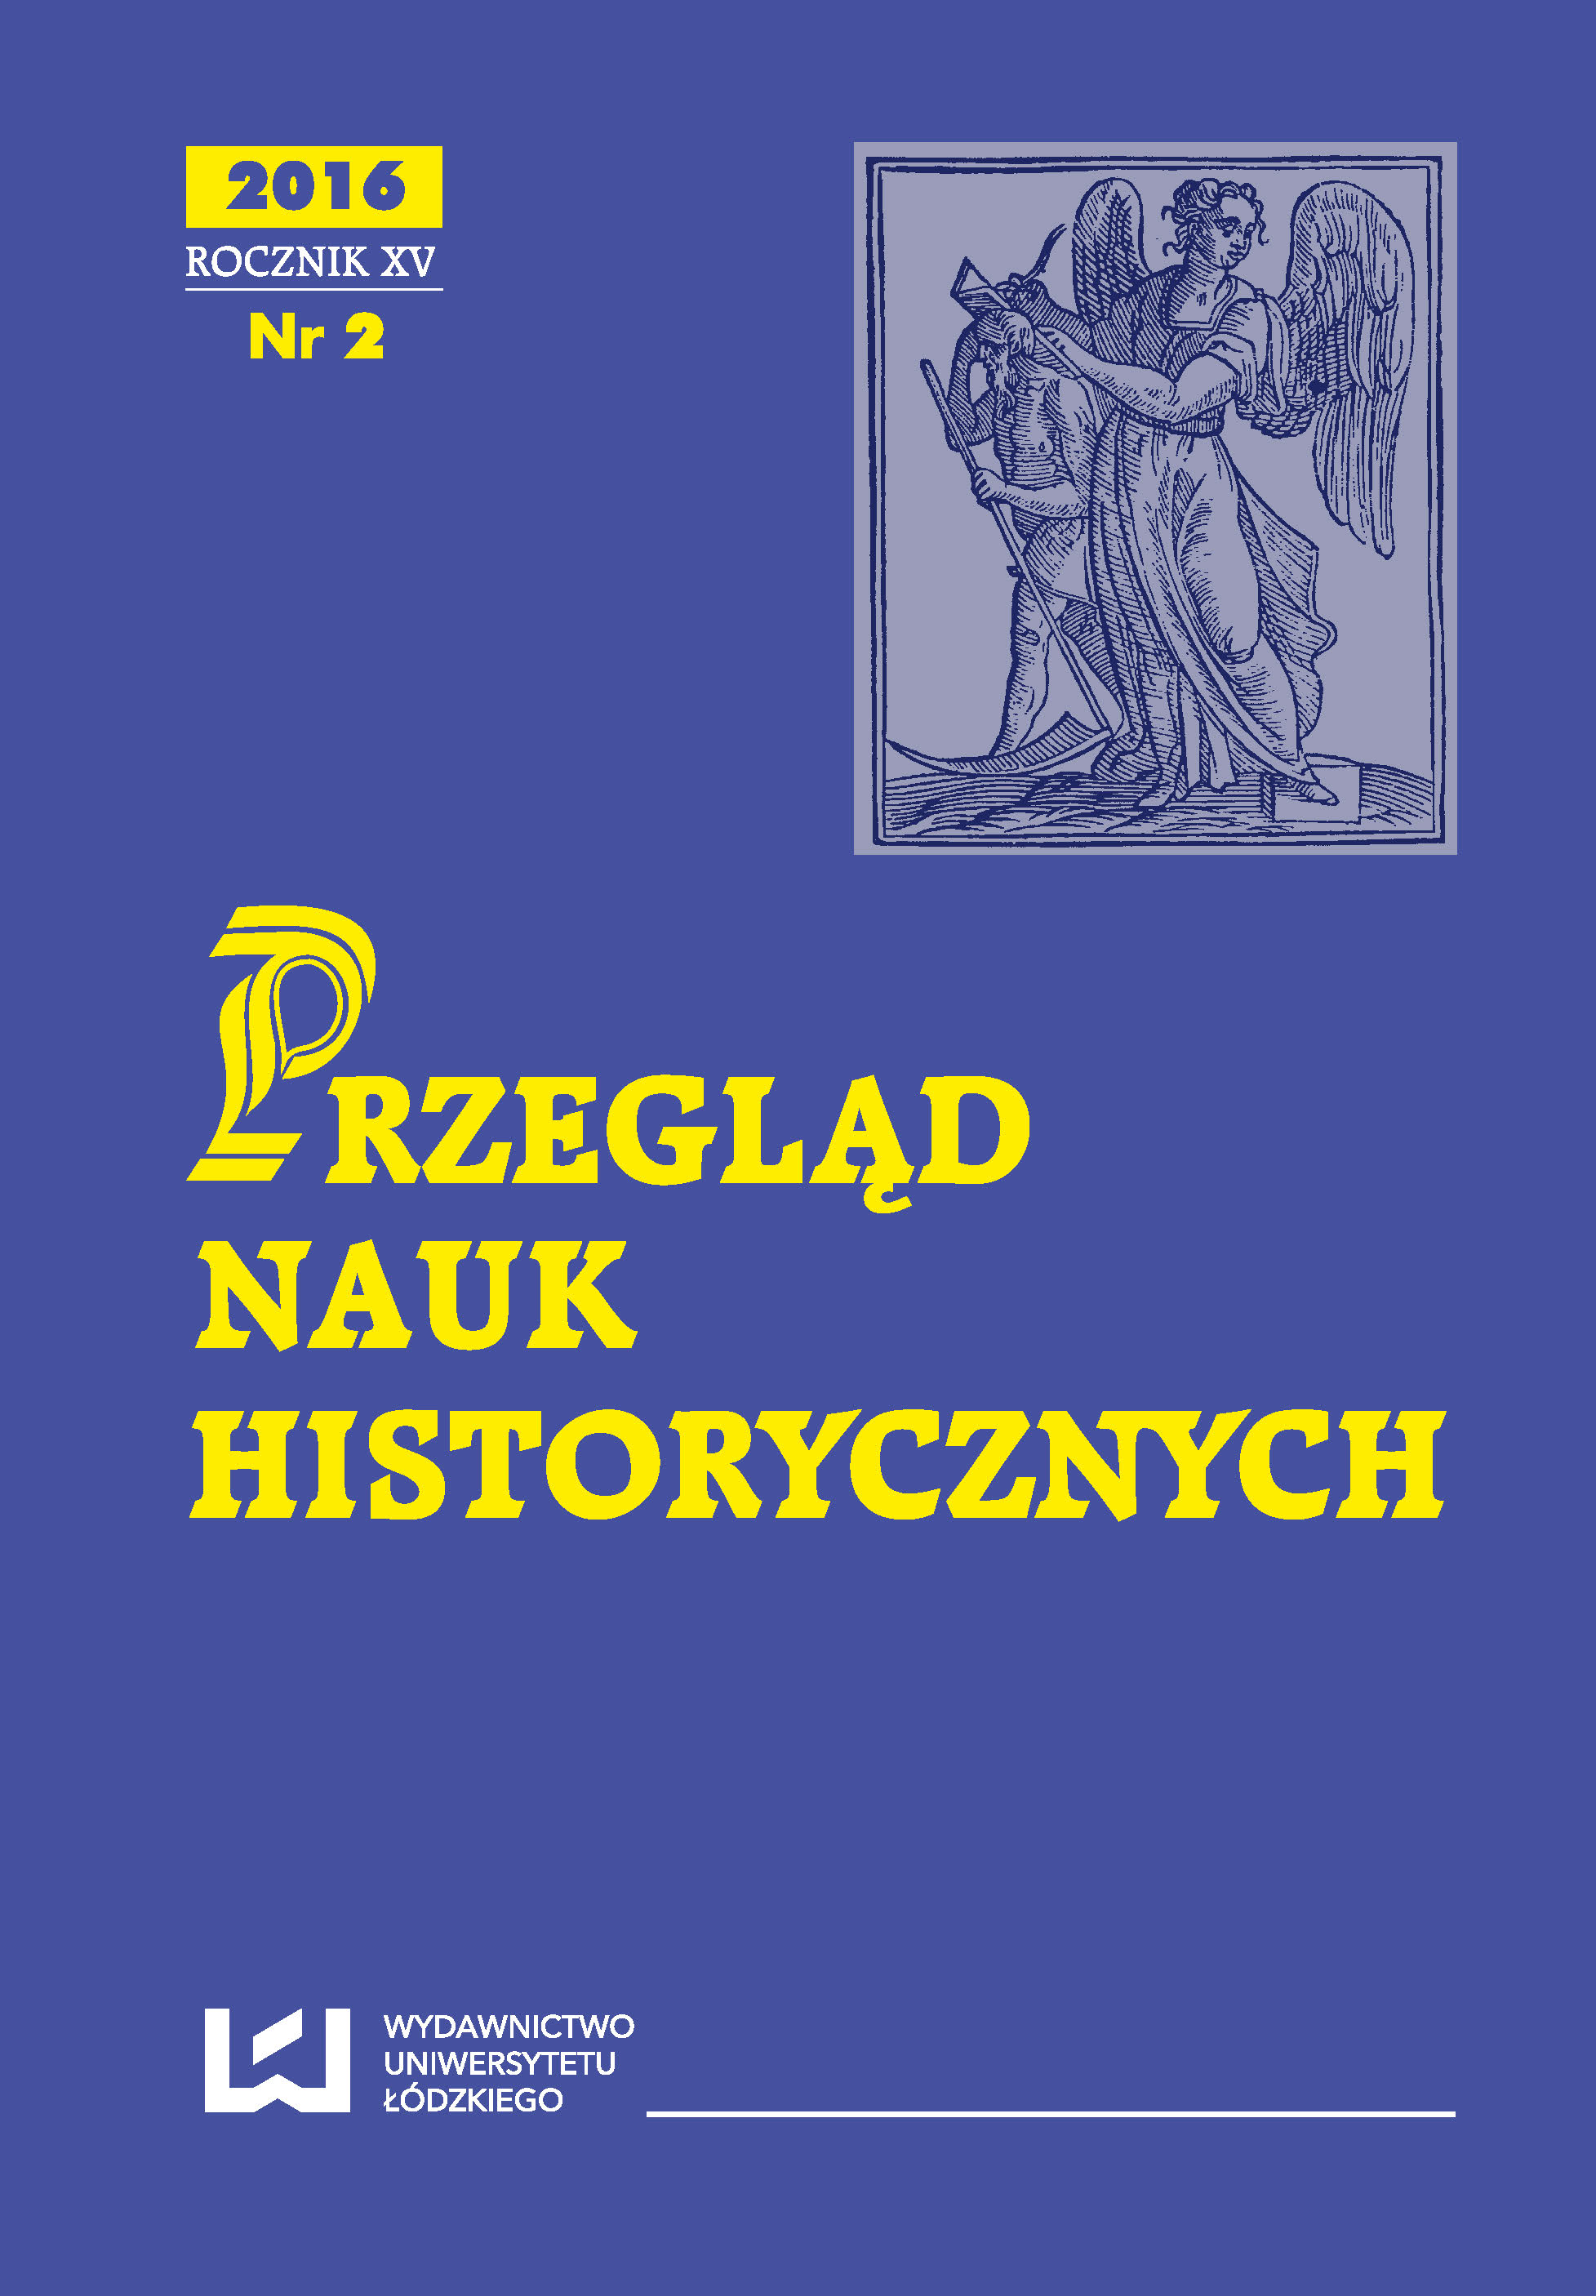 Byzantine MP in Paris in 1408. Cover Image